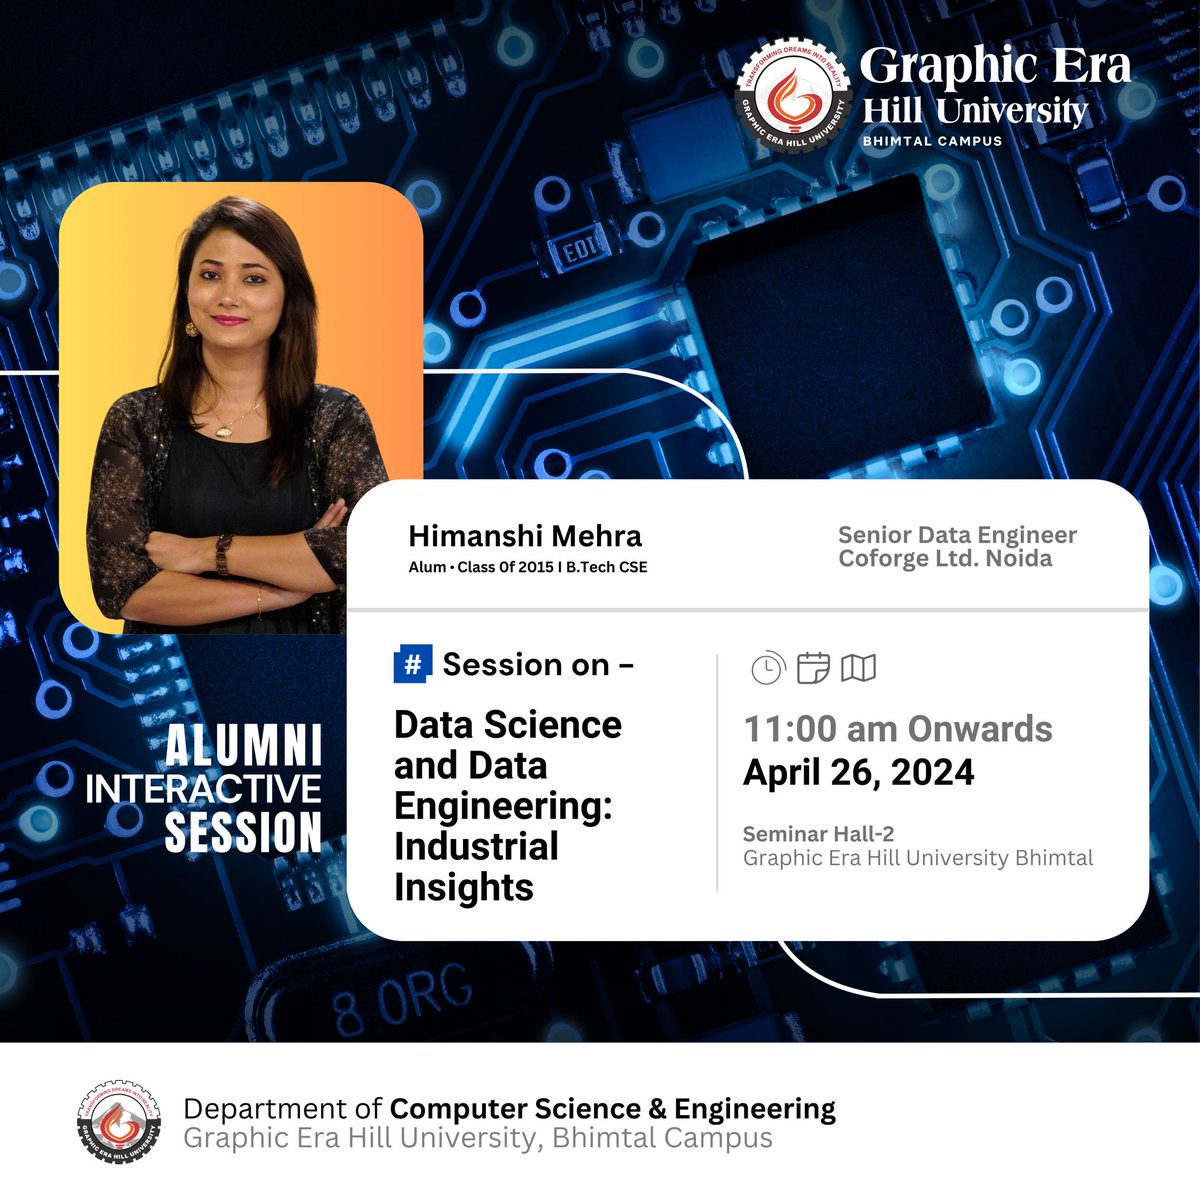 The Department of CSE at GEHU Bhimtal is hosting an Alumni Interactive Session on April 26, 2024. Ms. Himanshi Mehra, an alumna of Graphic Era Hill University Bhimtal (Batch 2011-15), will deliver an insightful session on 'Data Science and Data Engineering: Industrial Insights'.